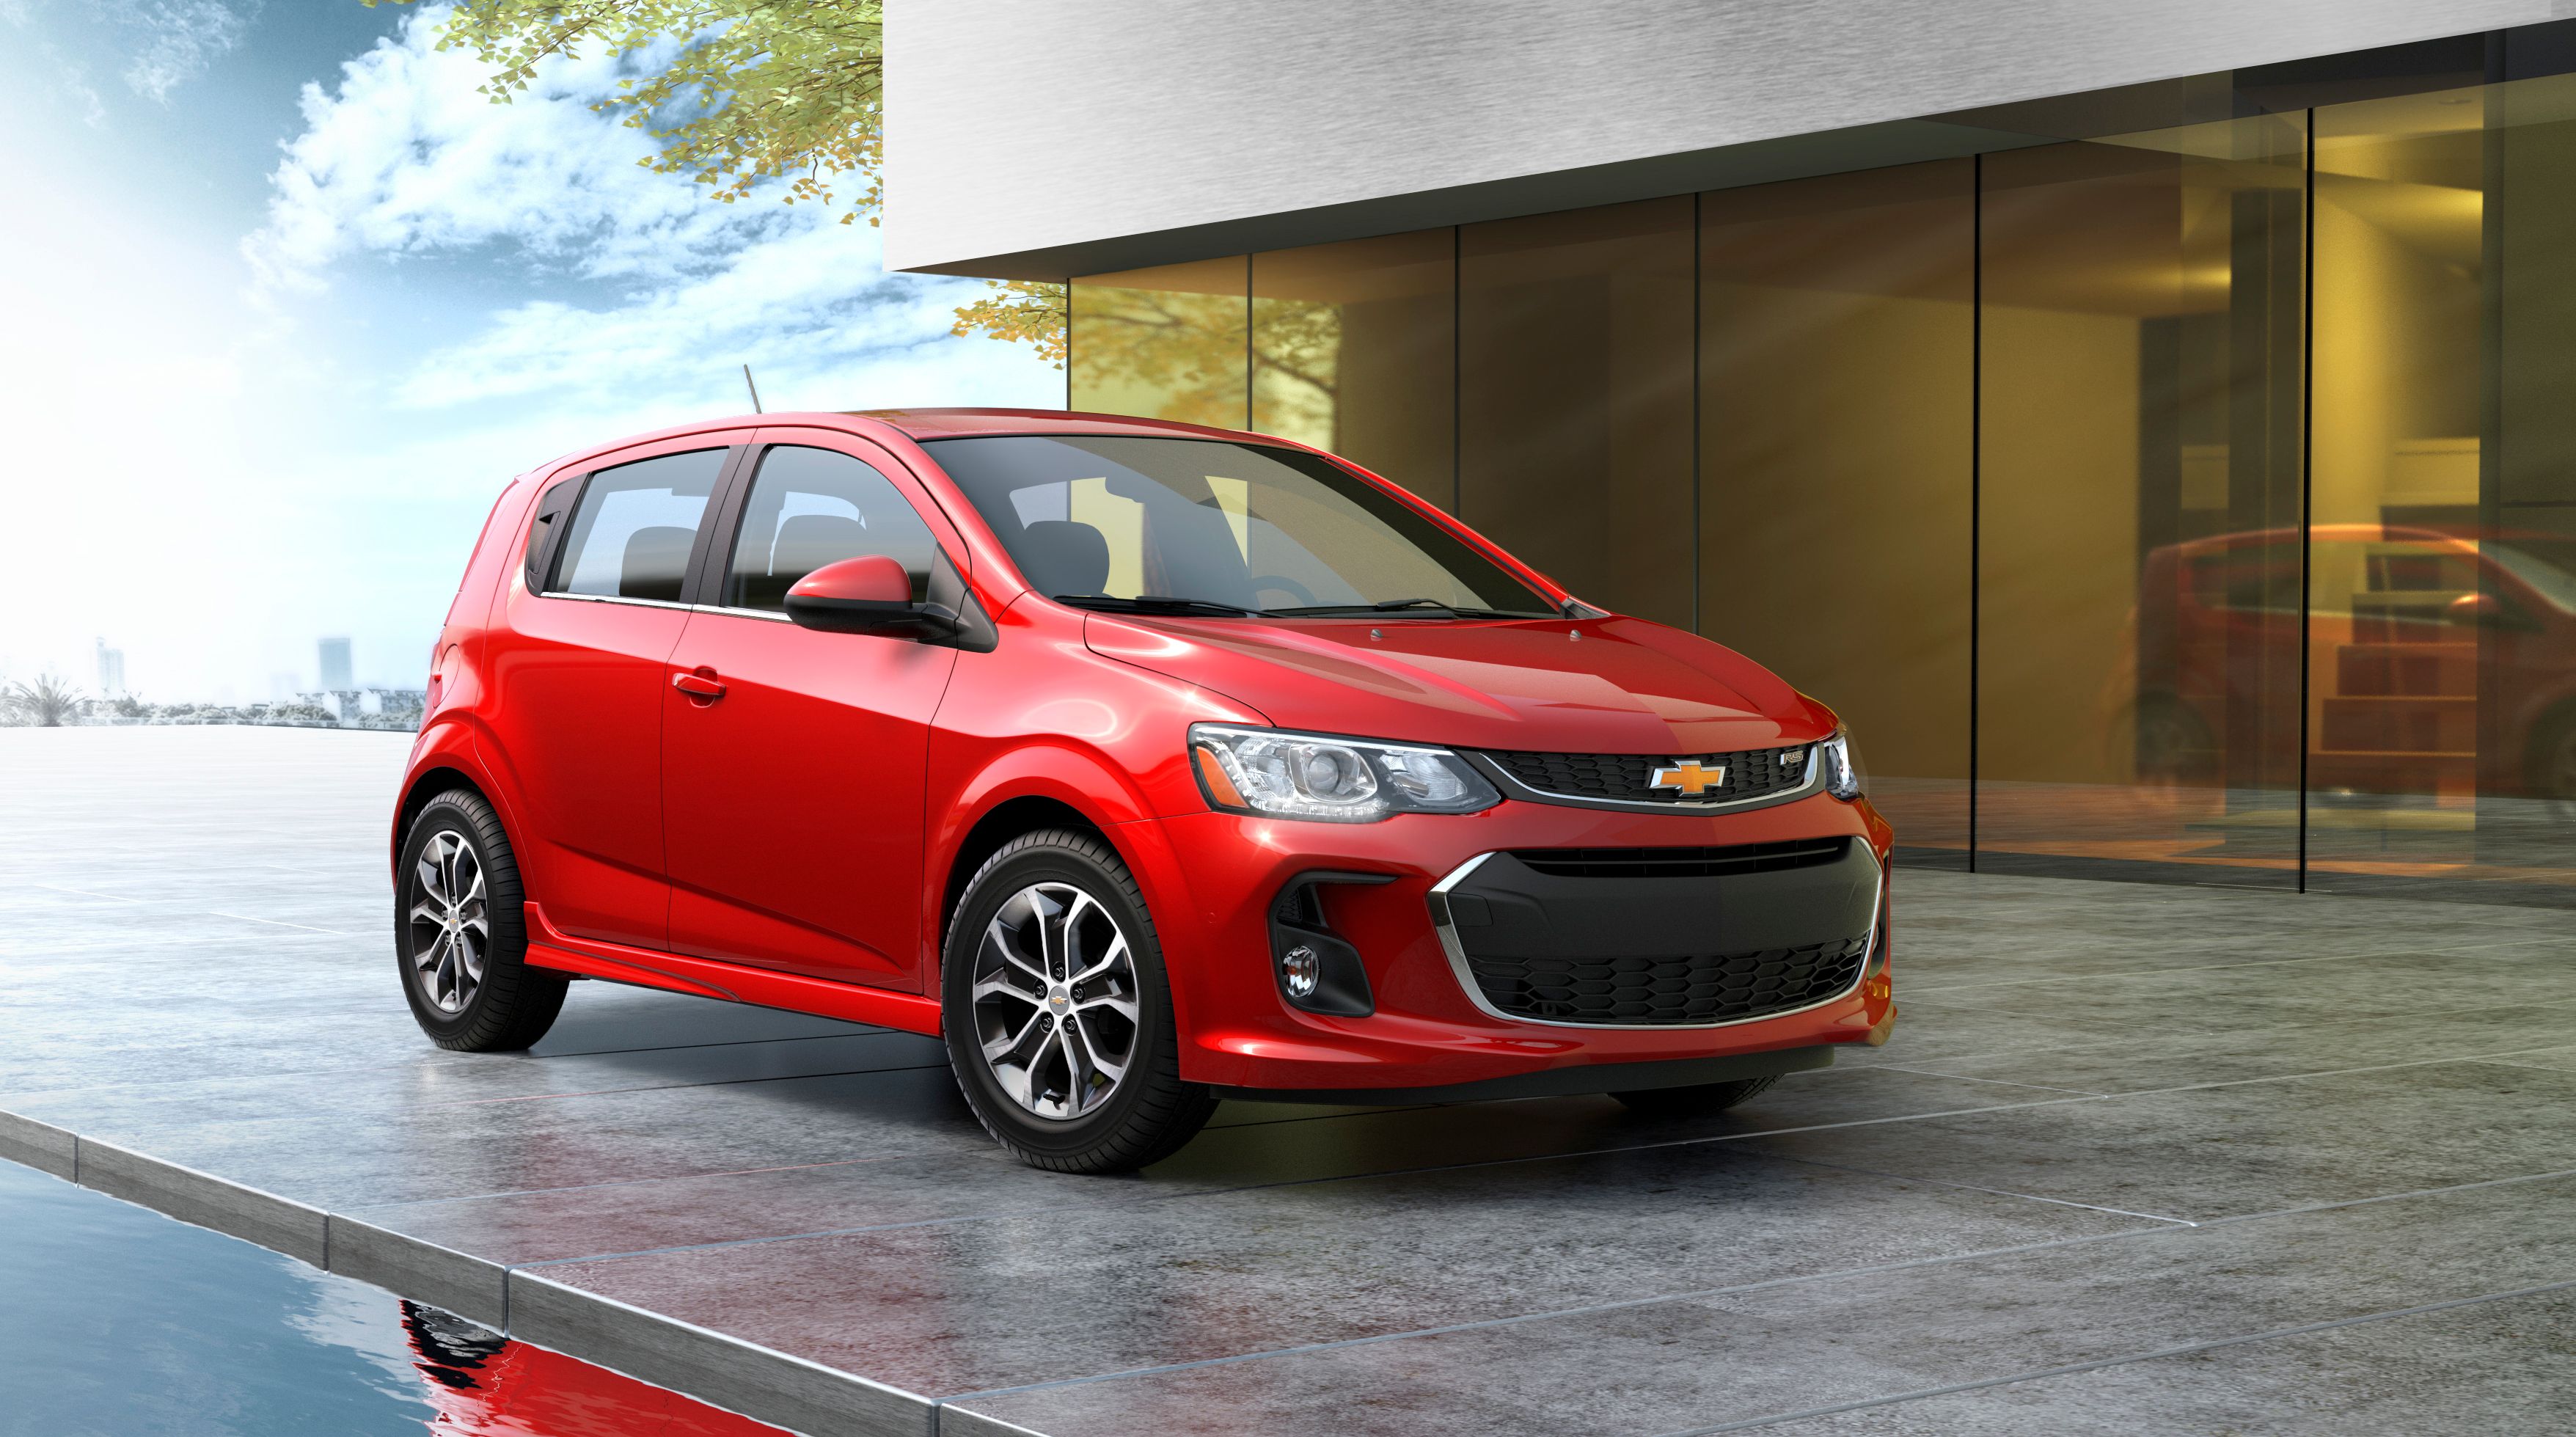 2018 Chevy Sonic is a high safety rated car